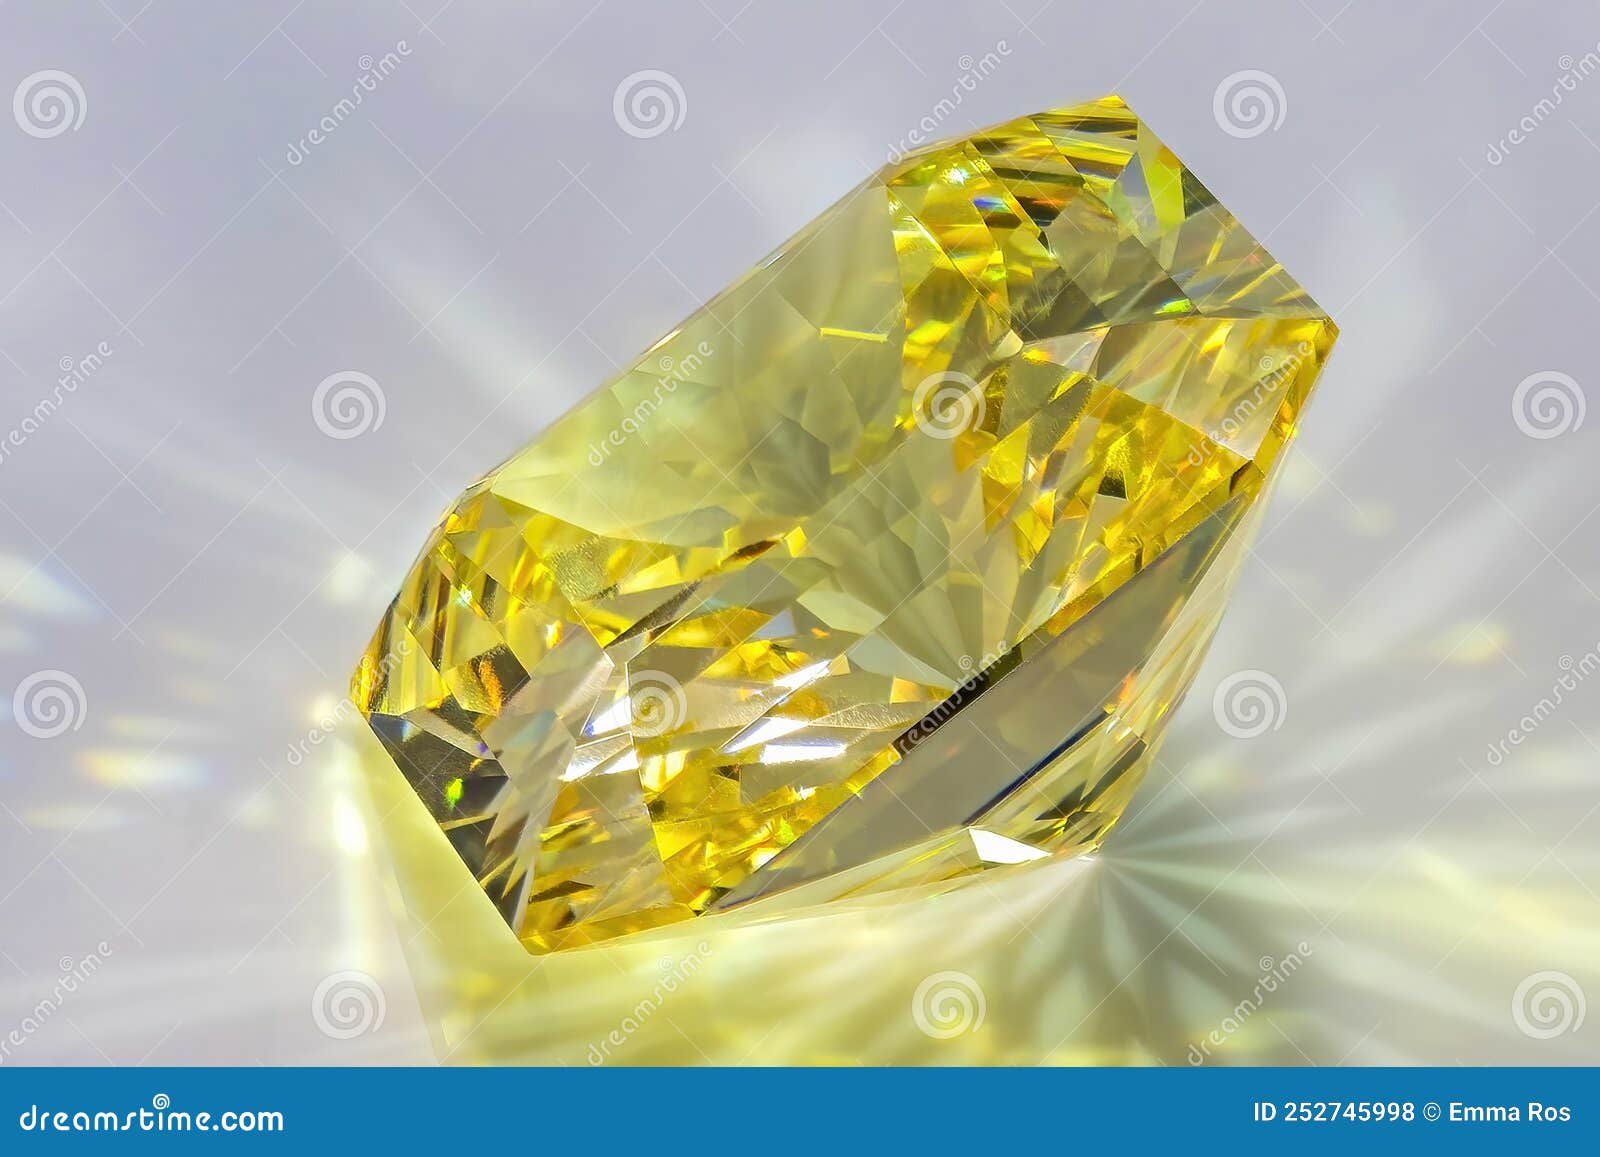 detail photo focus stacking of a self-cut cubic zirconia with lemon color and squartuguese cut, placed on a white acrylic glass